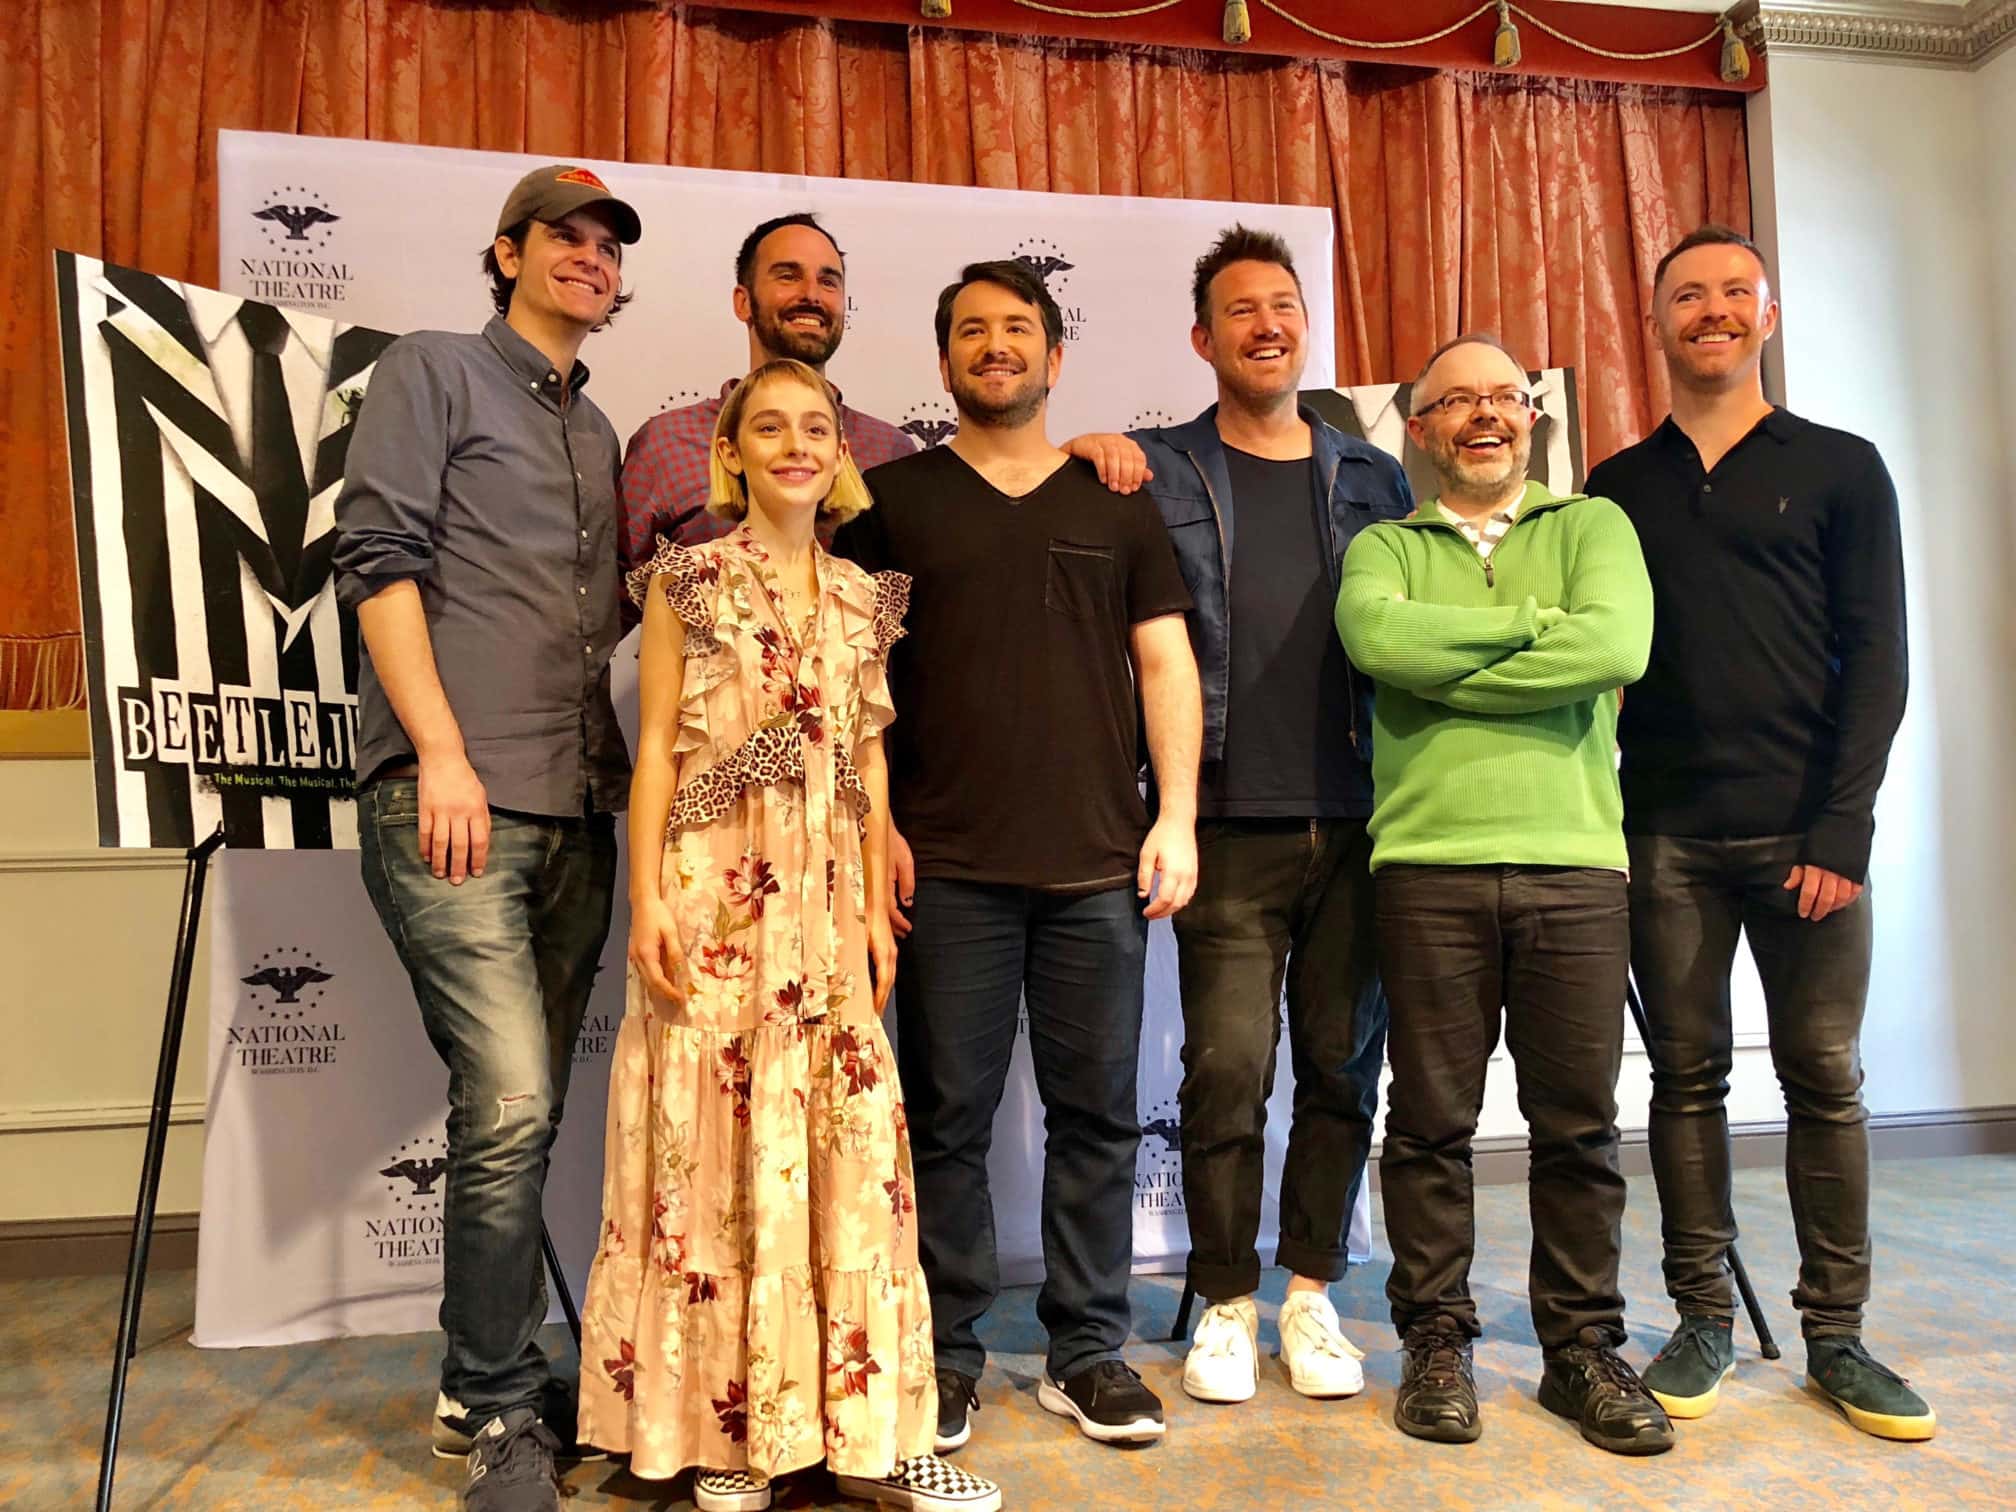 'Beetlejuice' creative team at the National Theatre: L-R Alex Timbers (Director), Sophia Anne Caruso (Lydia), Anthony King (book writer), Alex Brightman (Beetlejuice), Eddie Perfect (Composer and Lyricist), Scott Brown (book writer), Connor Gallagher. Photo by Nicole Hertvik.